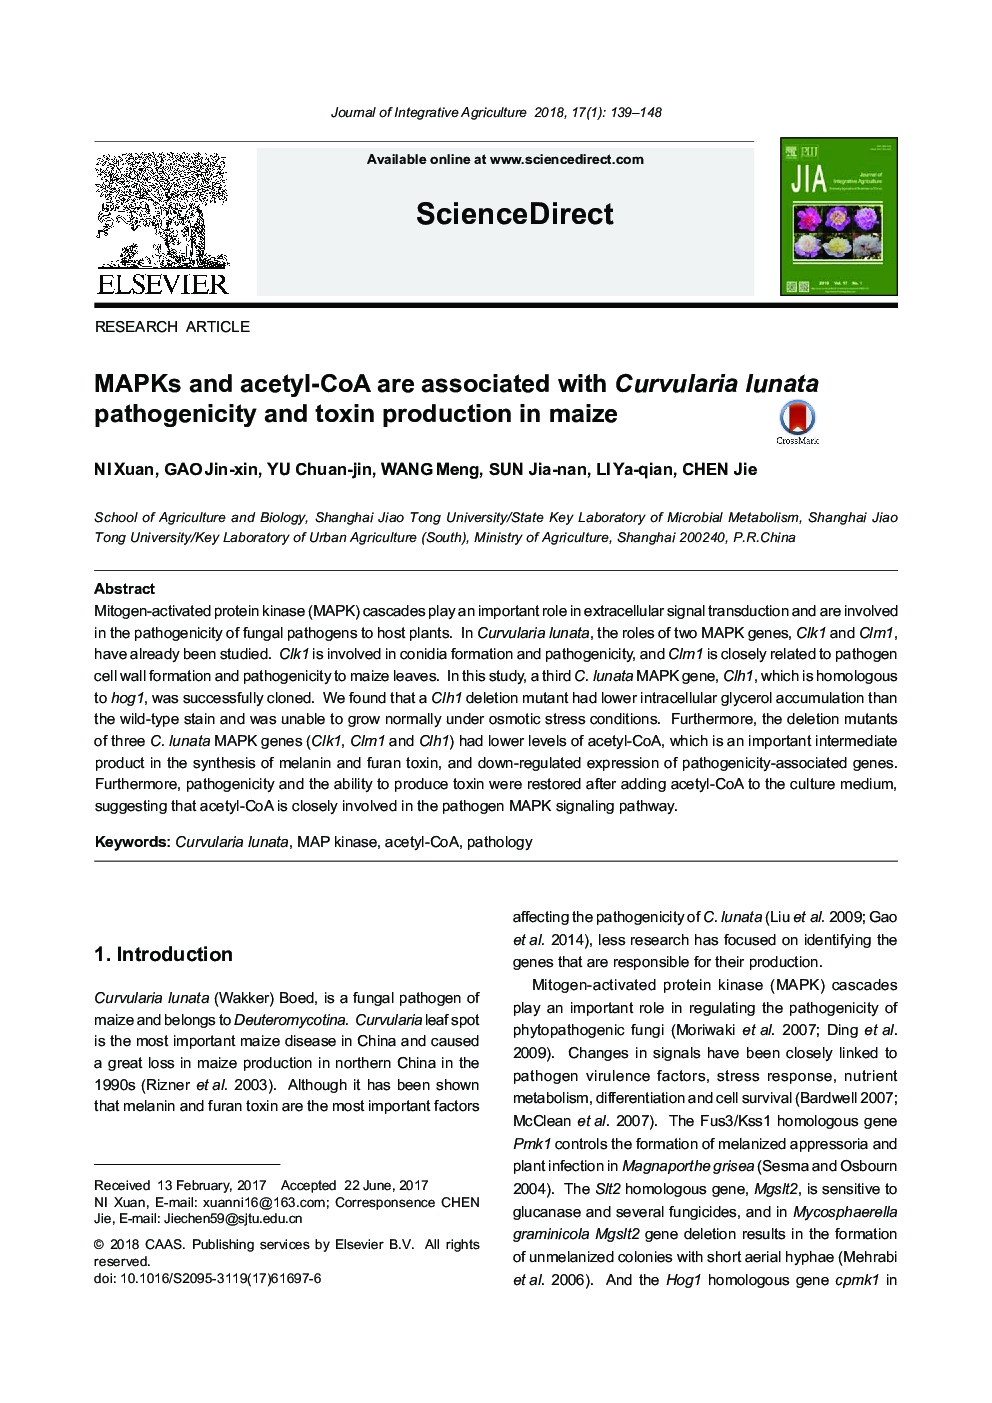 MAPKs and acetyl-CoA are associated with Curvularia lunata pathogenicity and toxin production in maize